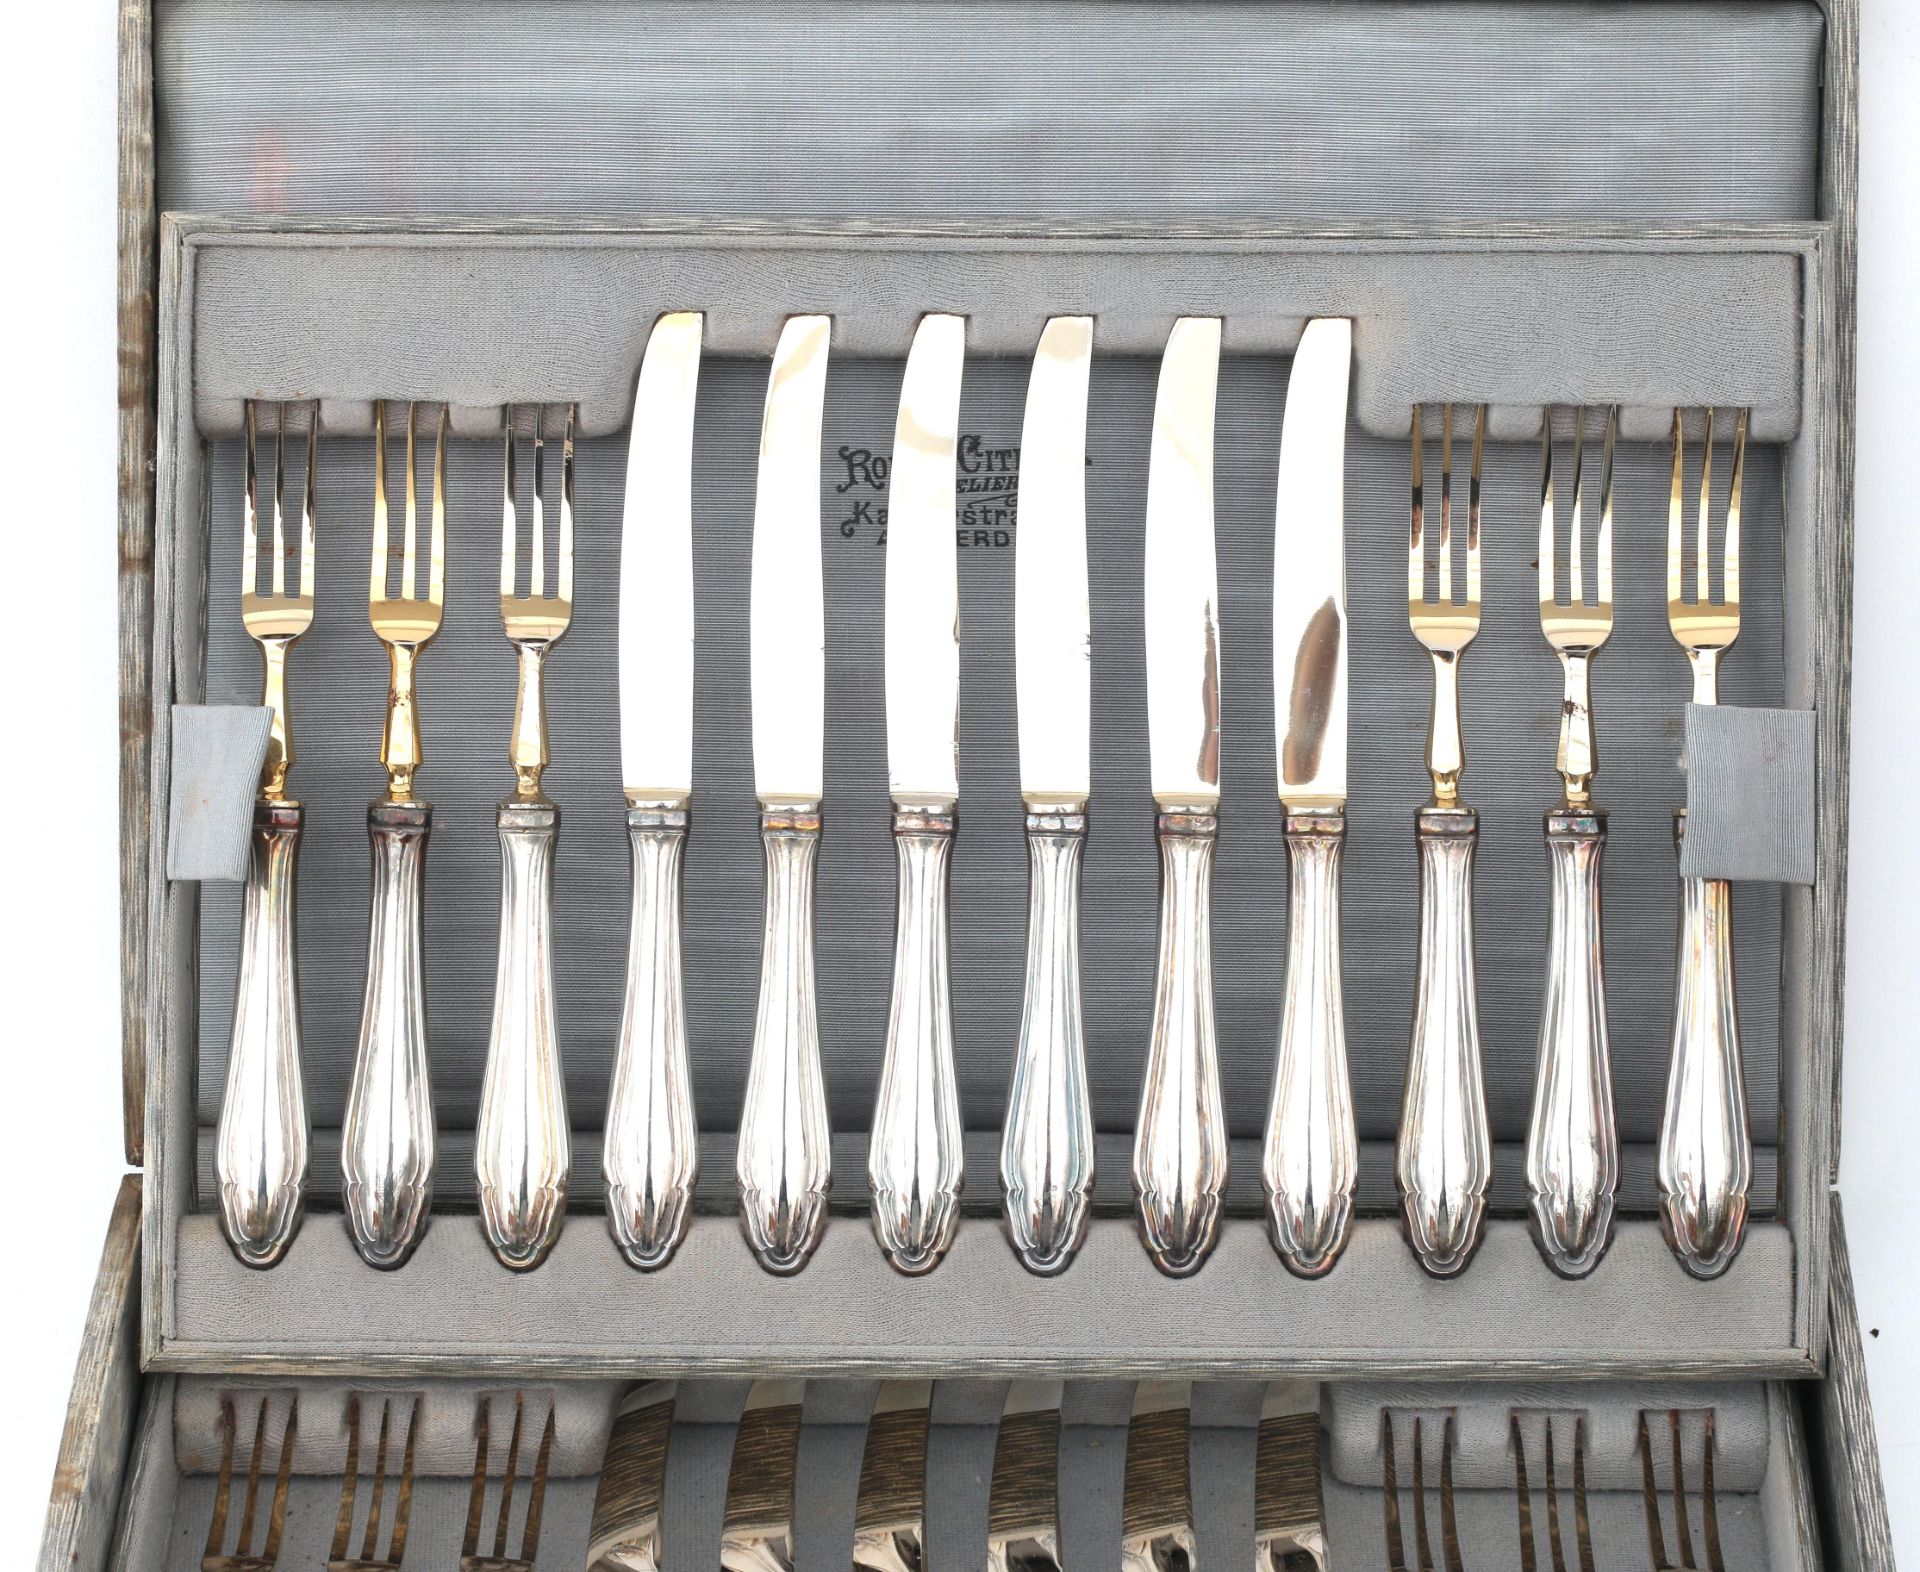 Twelve partially gilded fruit forks and fruit knives with 835 silver handles in case, adress: Roelof - Bild 2 aus 4